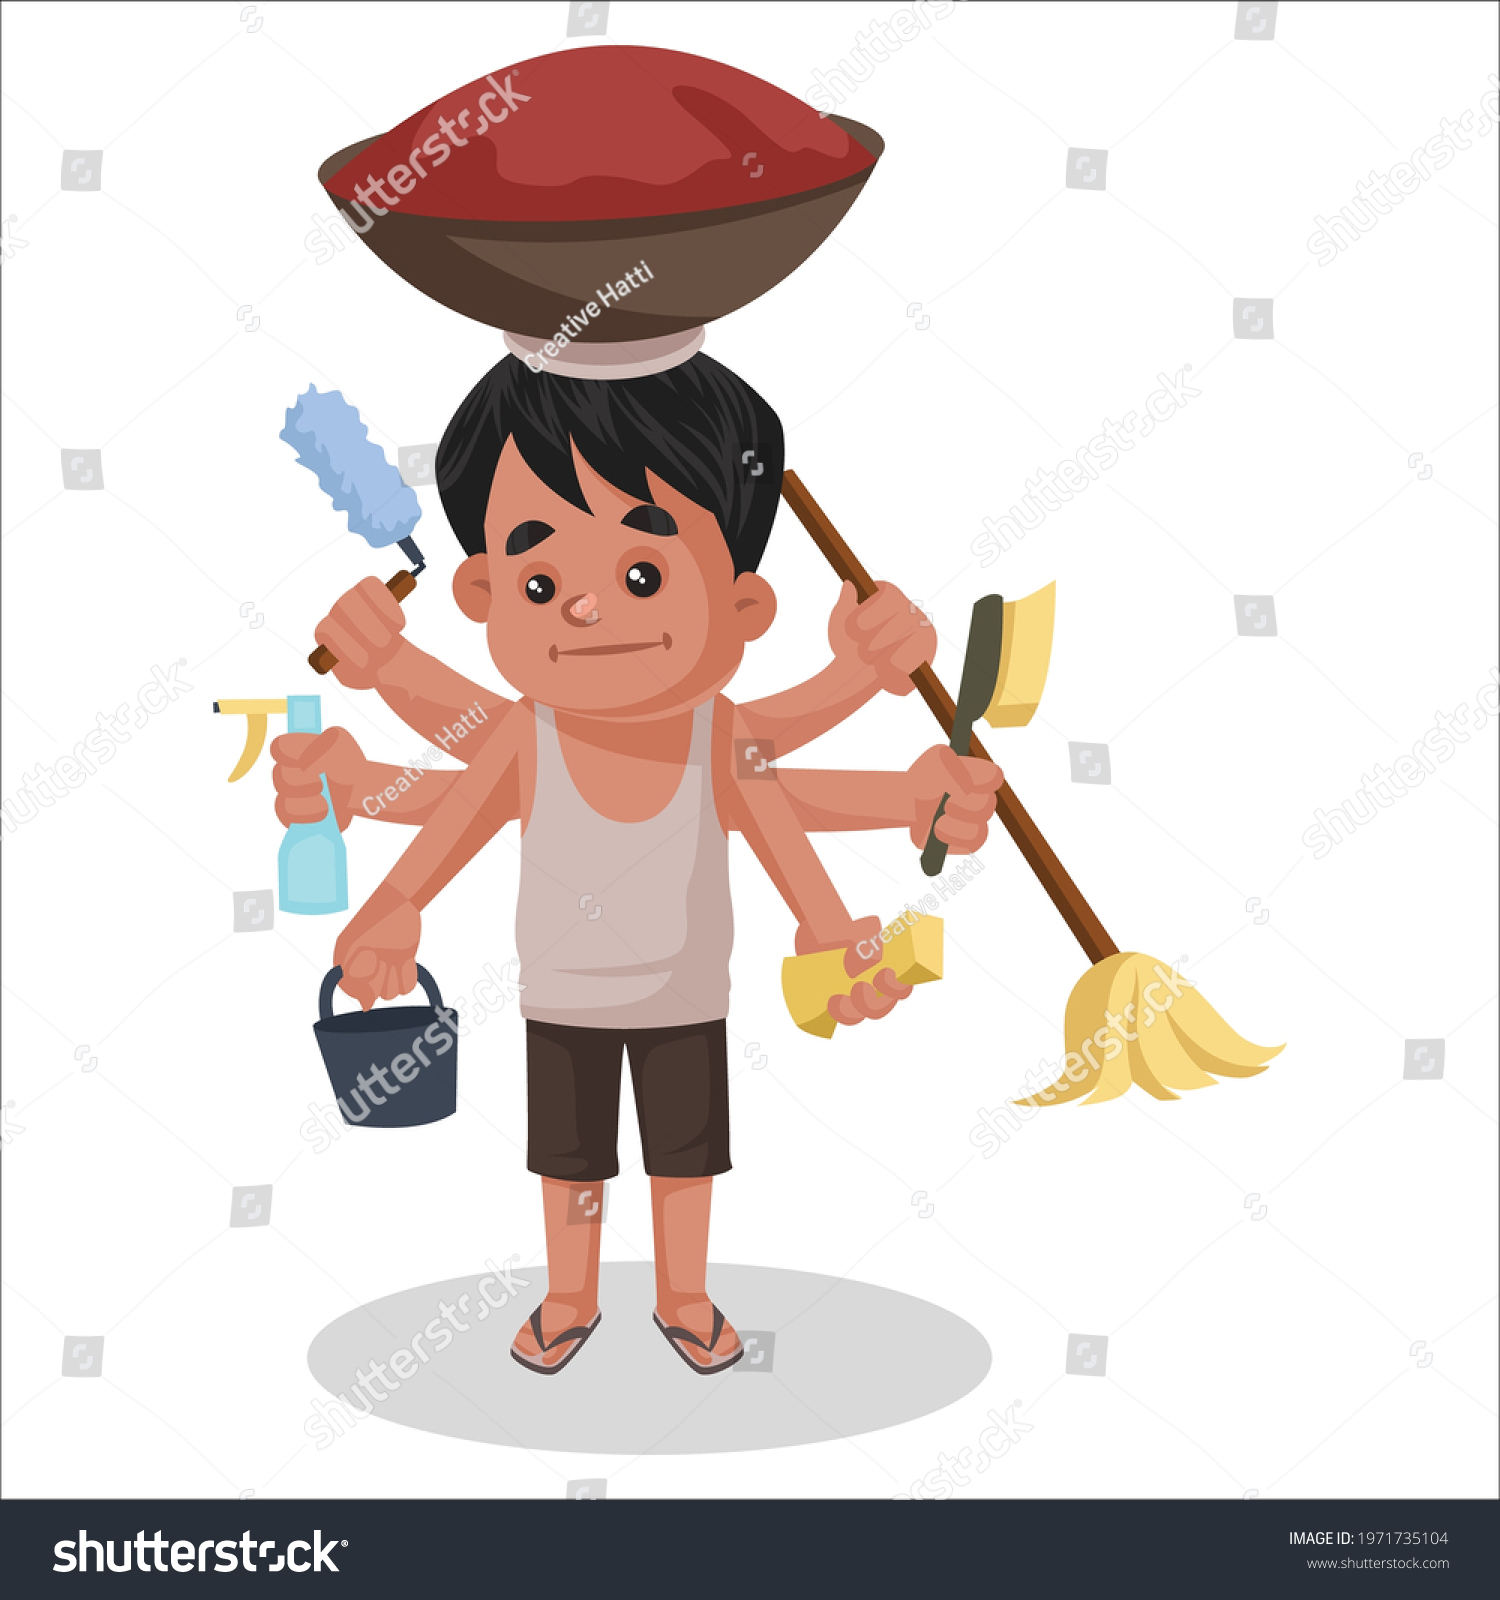 SVG of Boy is doing multitasking with multiple hands. Vector graphic illustration. Individually on a white background. svg